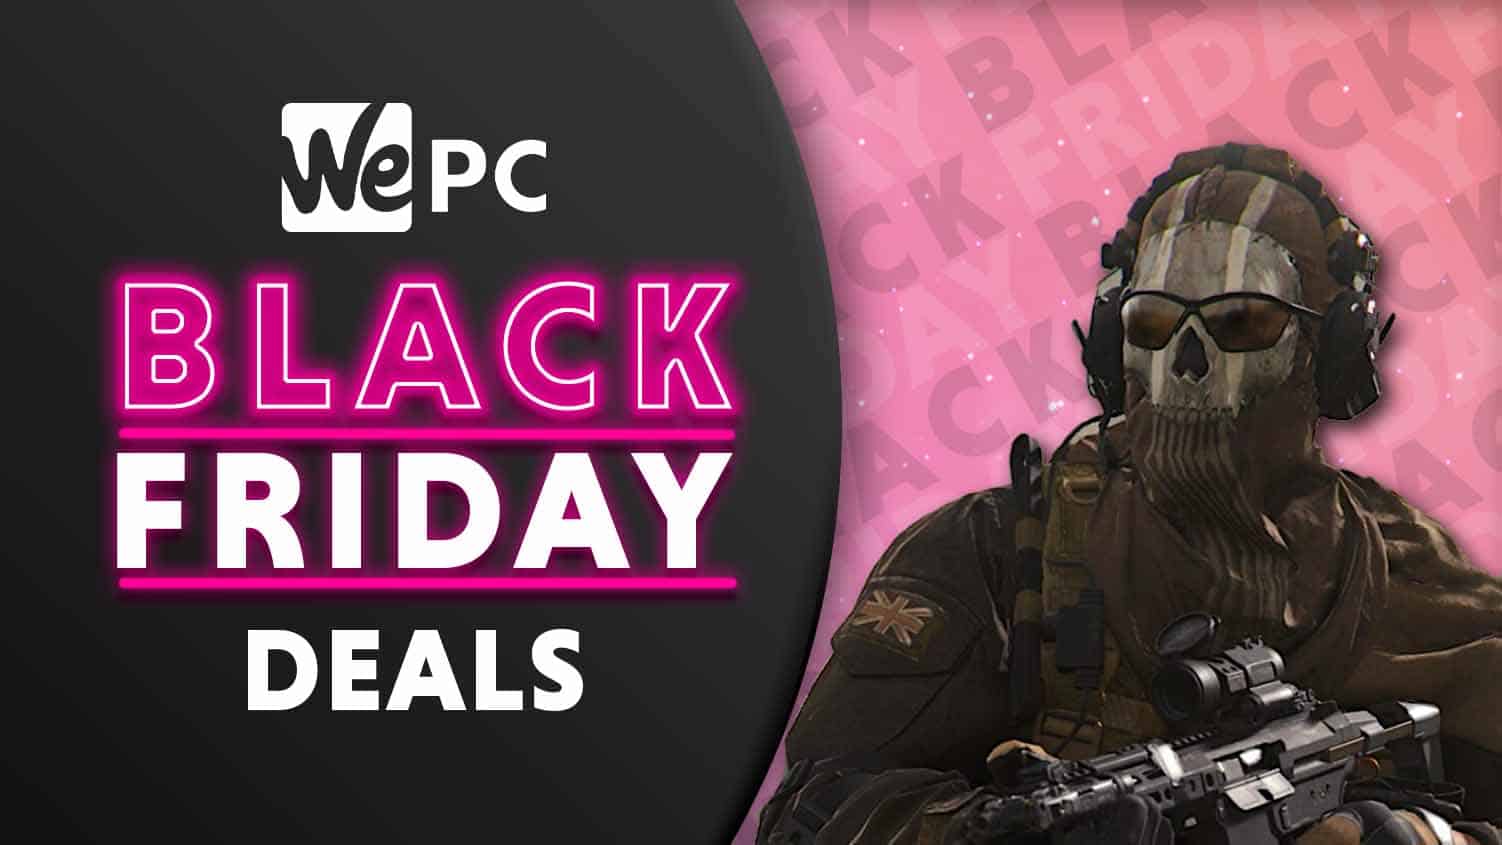 Call of Duty Modern Warfare 2 is on sale for Black Friday